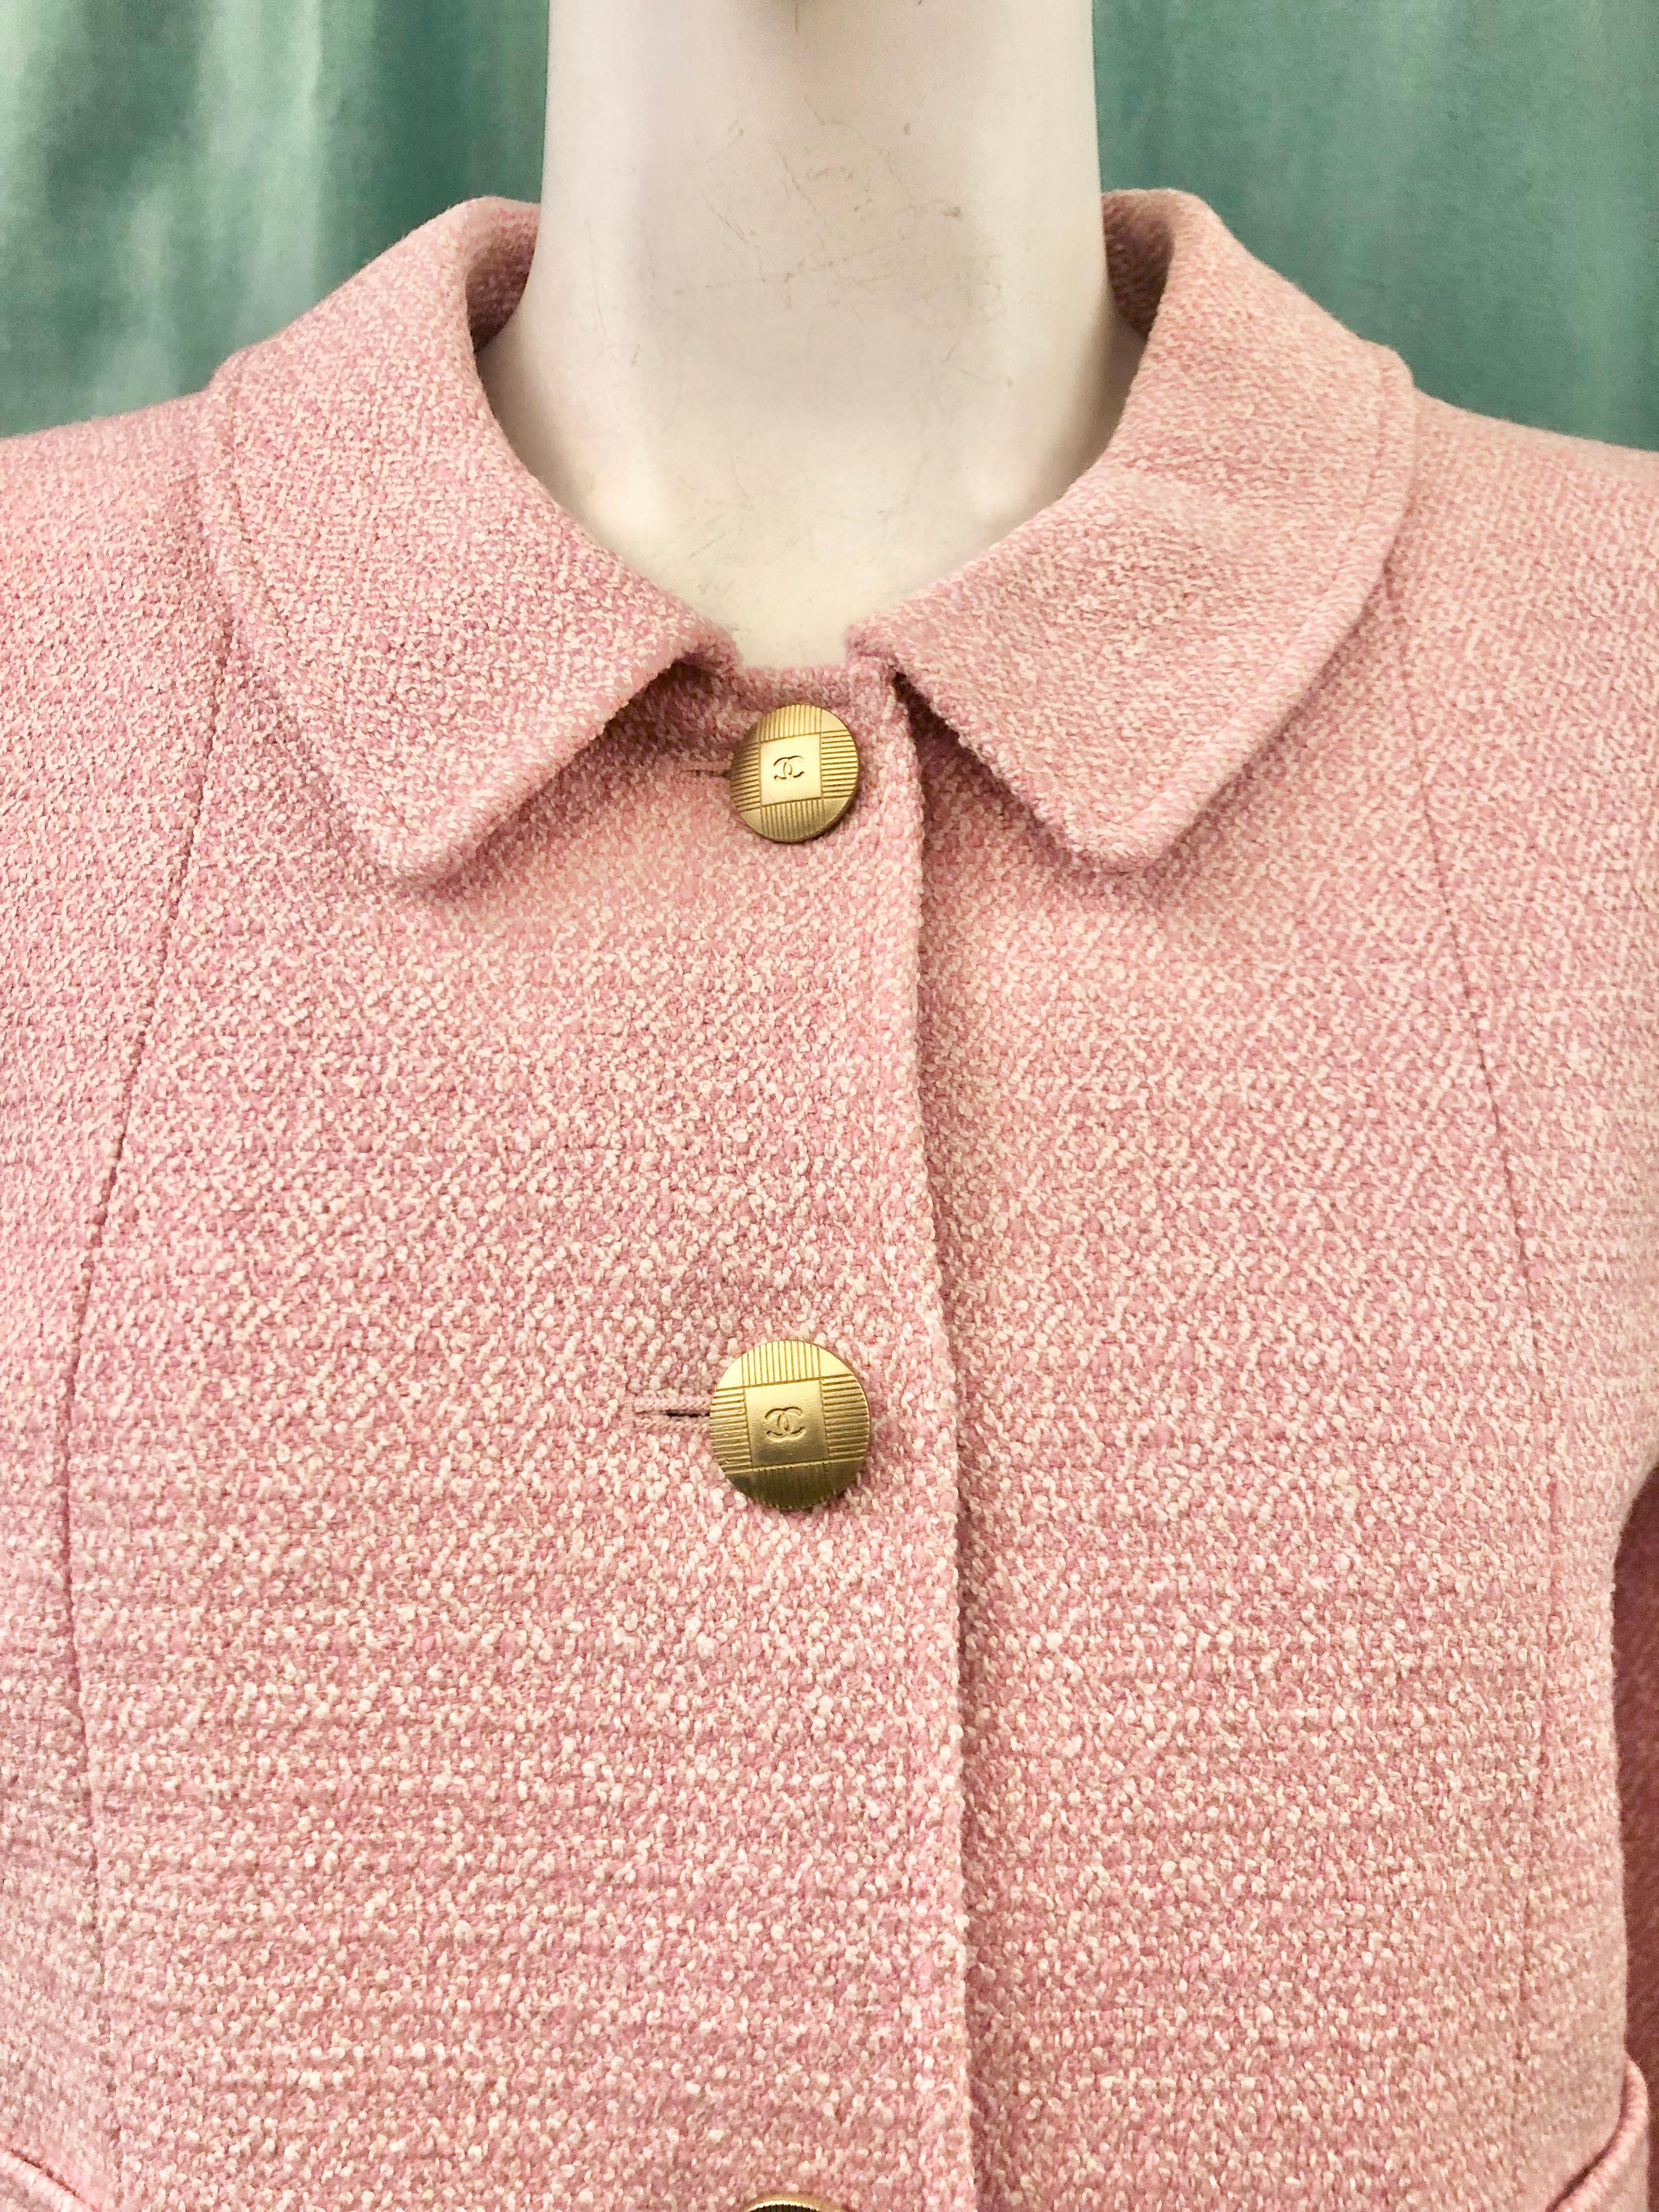 - Vintage Chanel pink/white tweed suit from spring 1998. 

- Gold hardware “CC” buttons closure. 

- Four front pockets. 

- Boxy straight cut. 

- Silk “CC” lining with gold chain.

- Size 40. 

